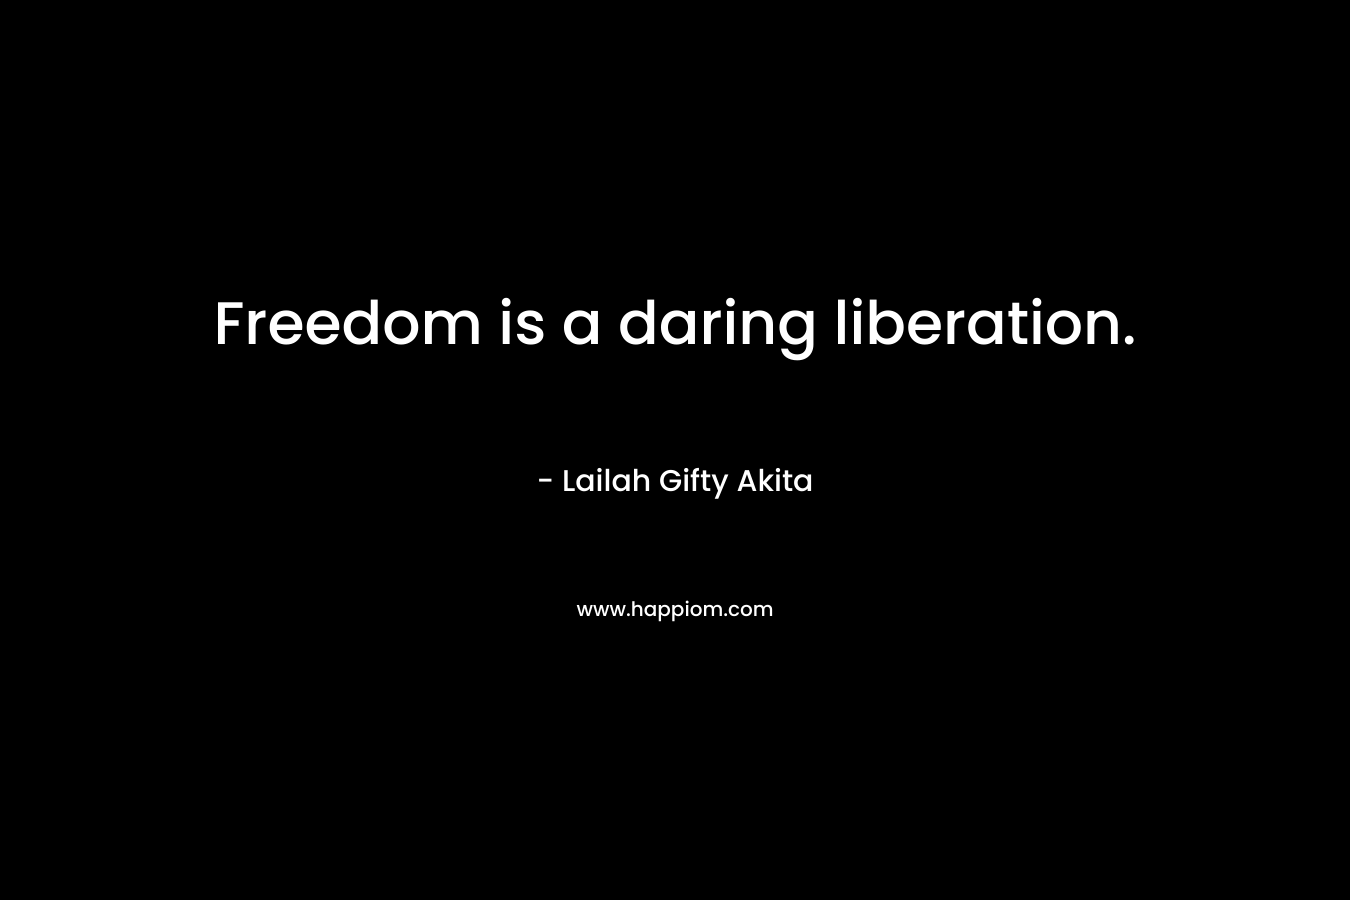 Freedom is a daring liberation.